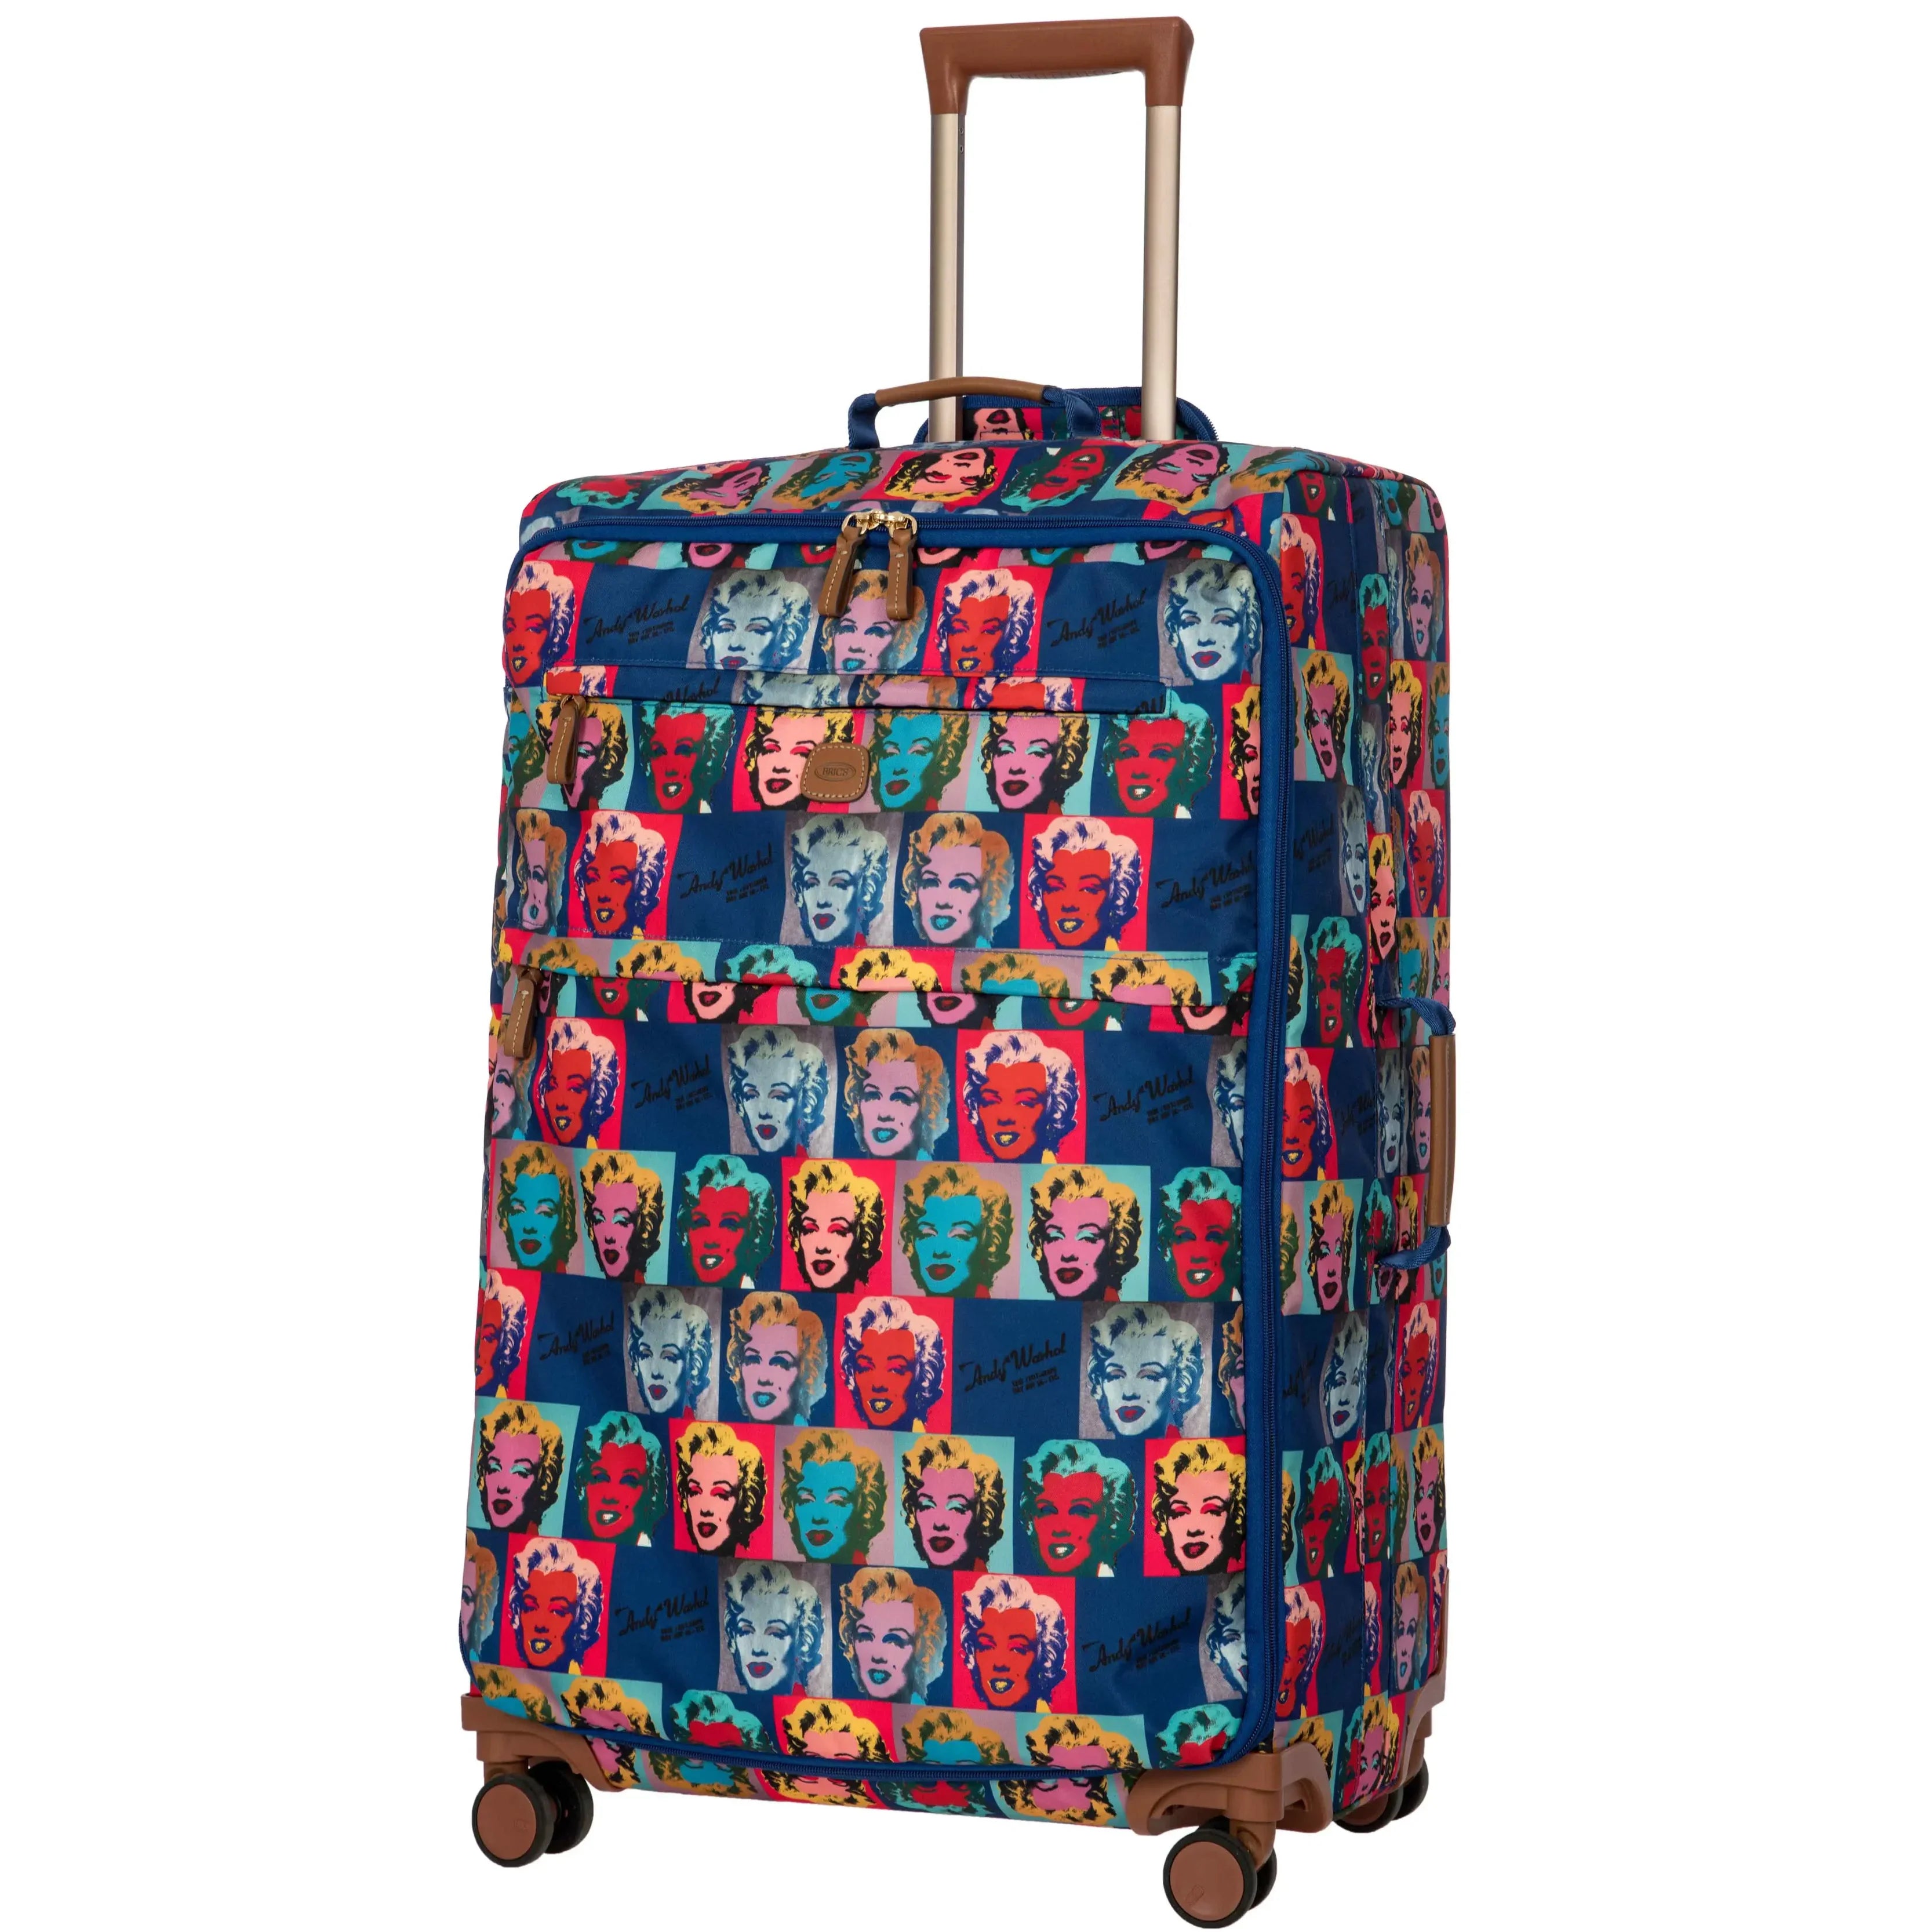 Brics Andy Warhol Chariot 4 roues 77 cm - Marilyn